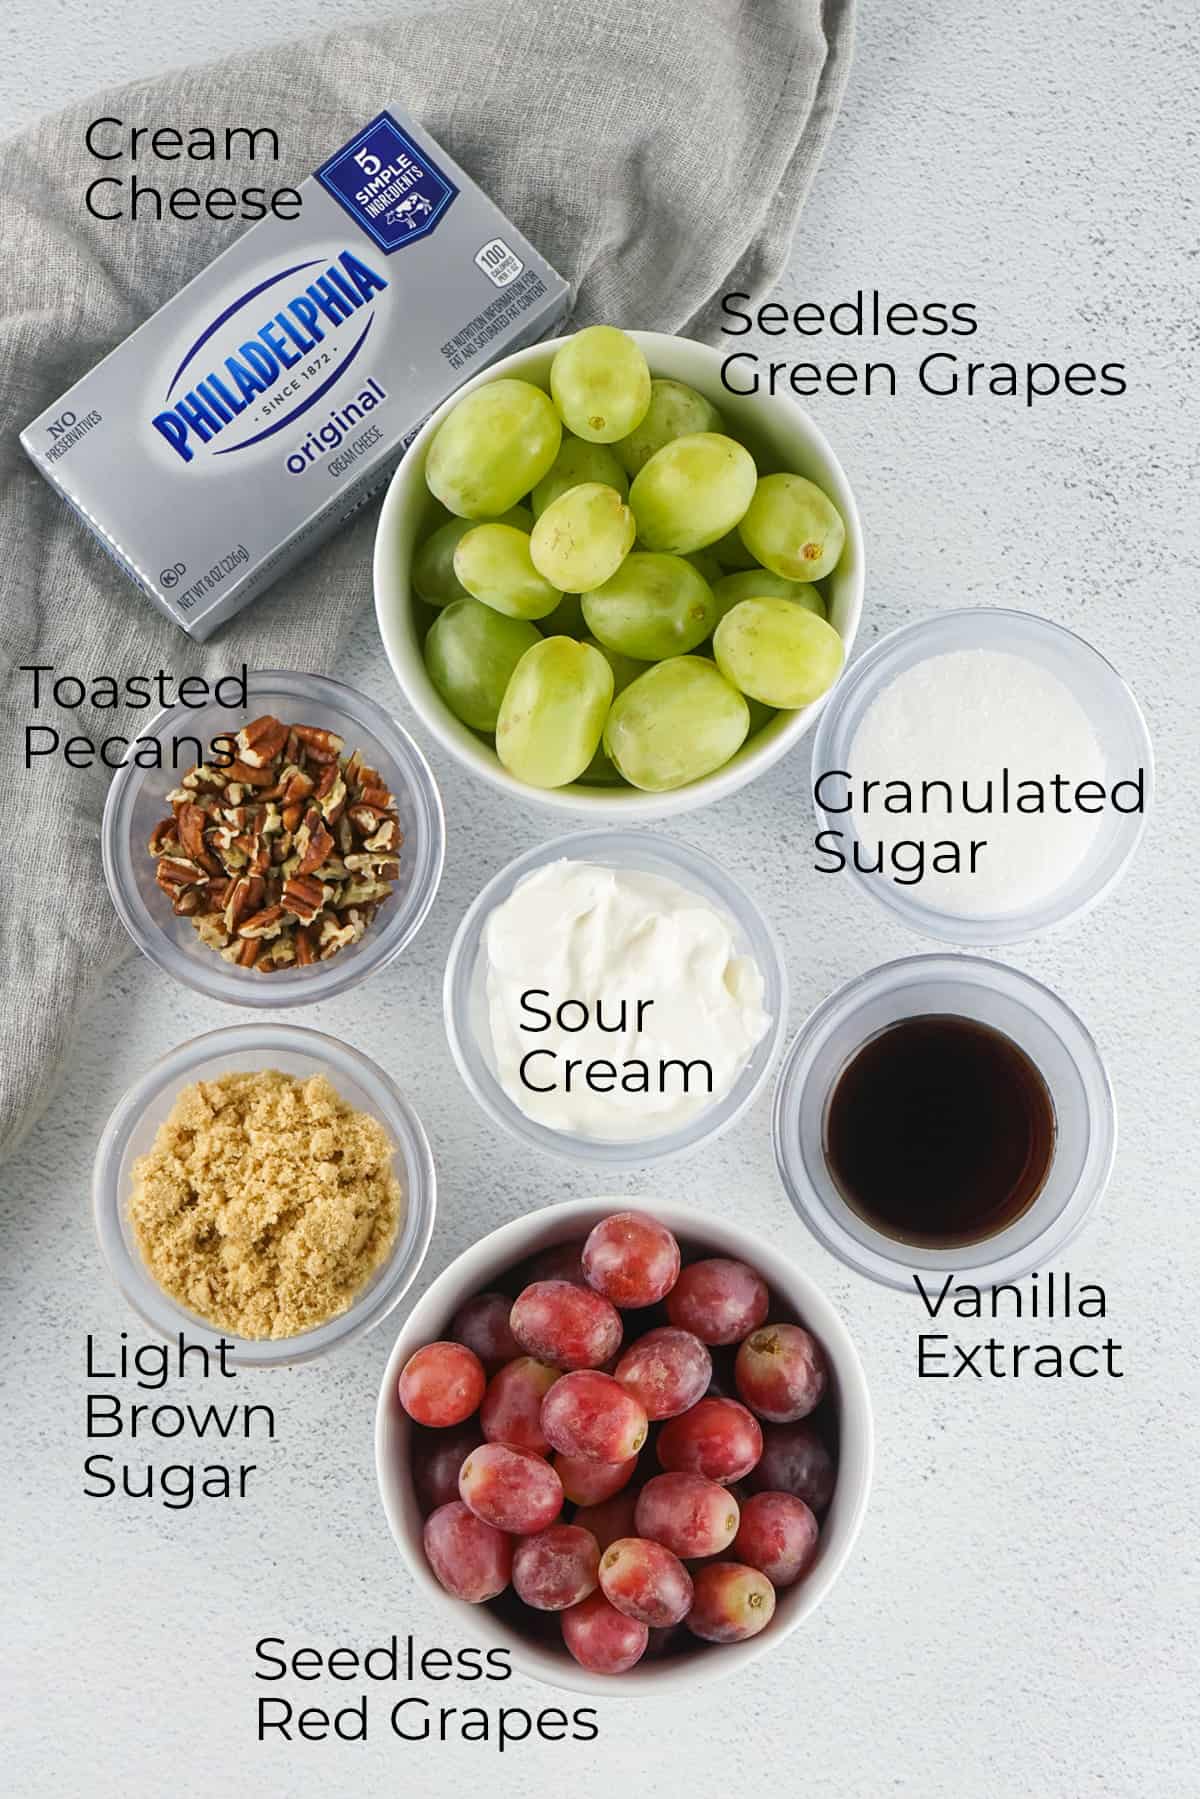 All ingredients needed for grape salad.